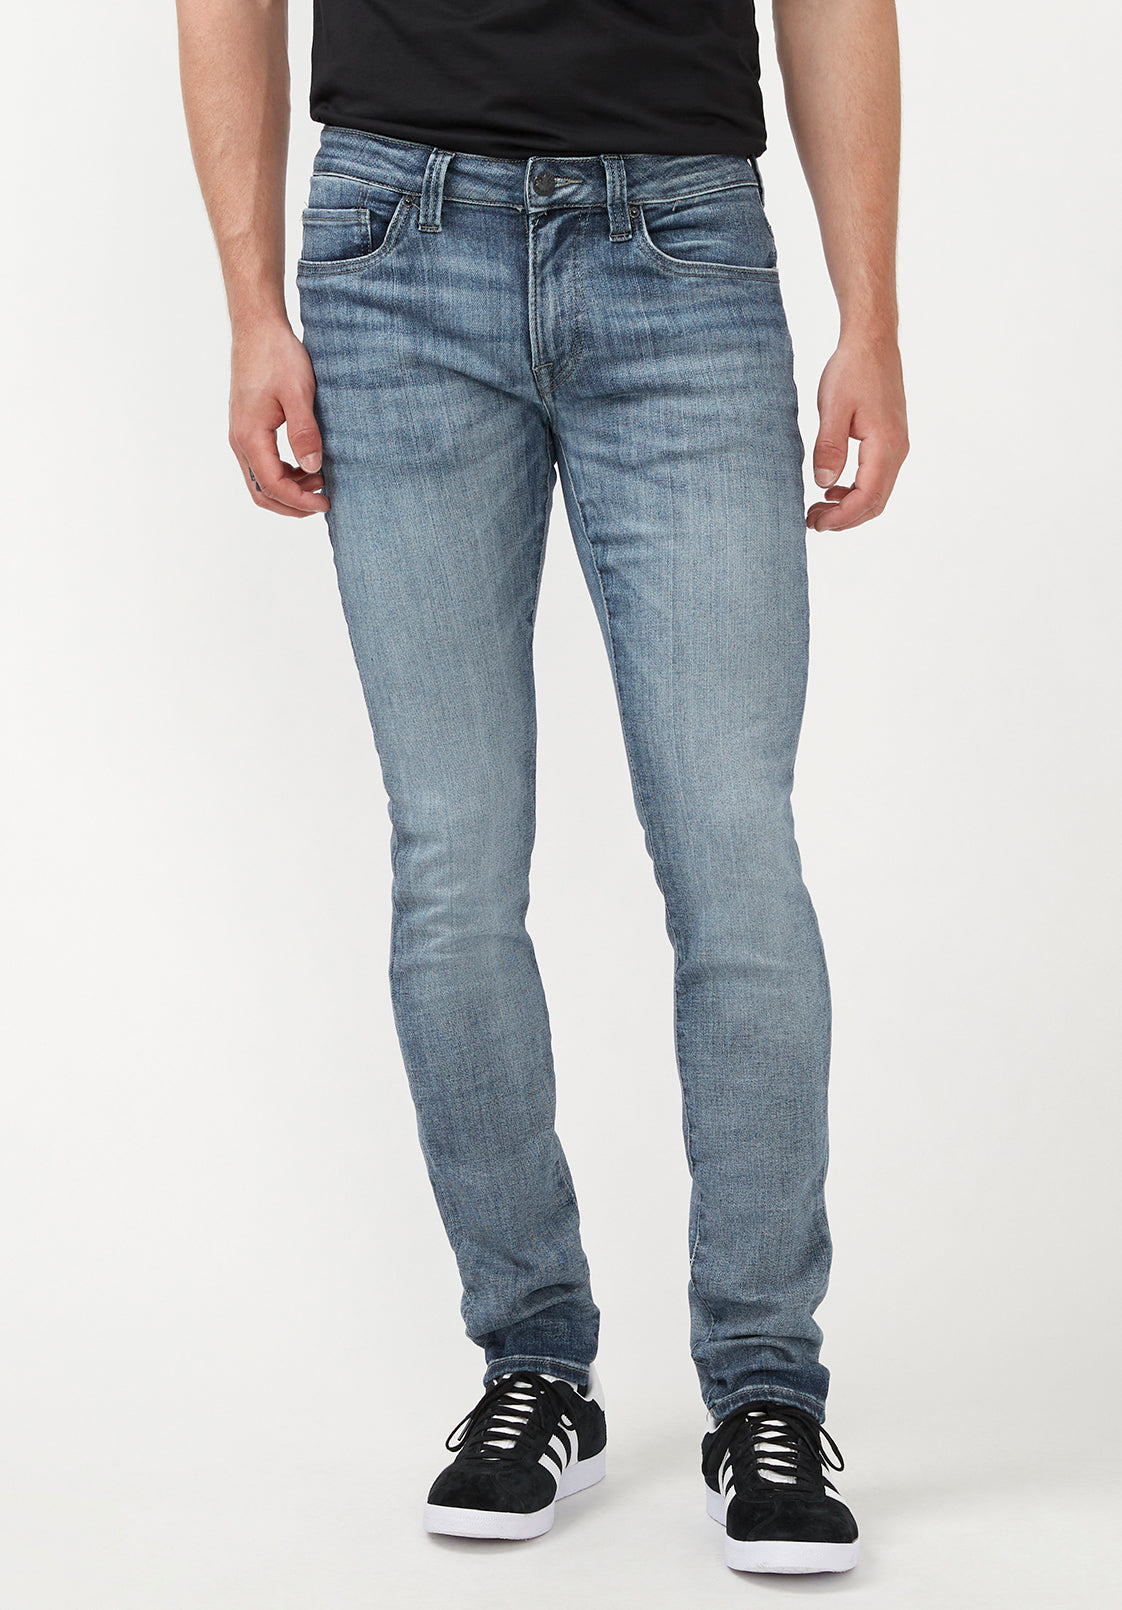 Skinny Max Men's Jeans in Whiskered and Contrasted Light Blue – Buffalo ...